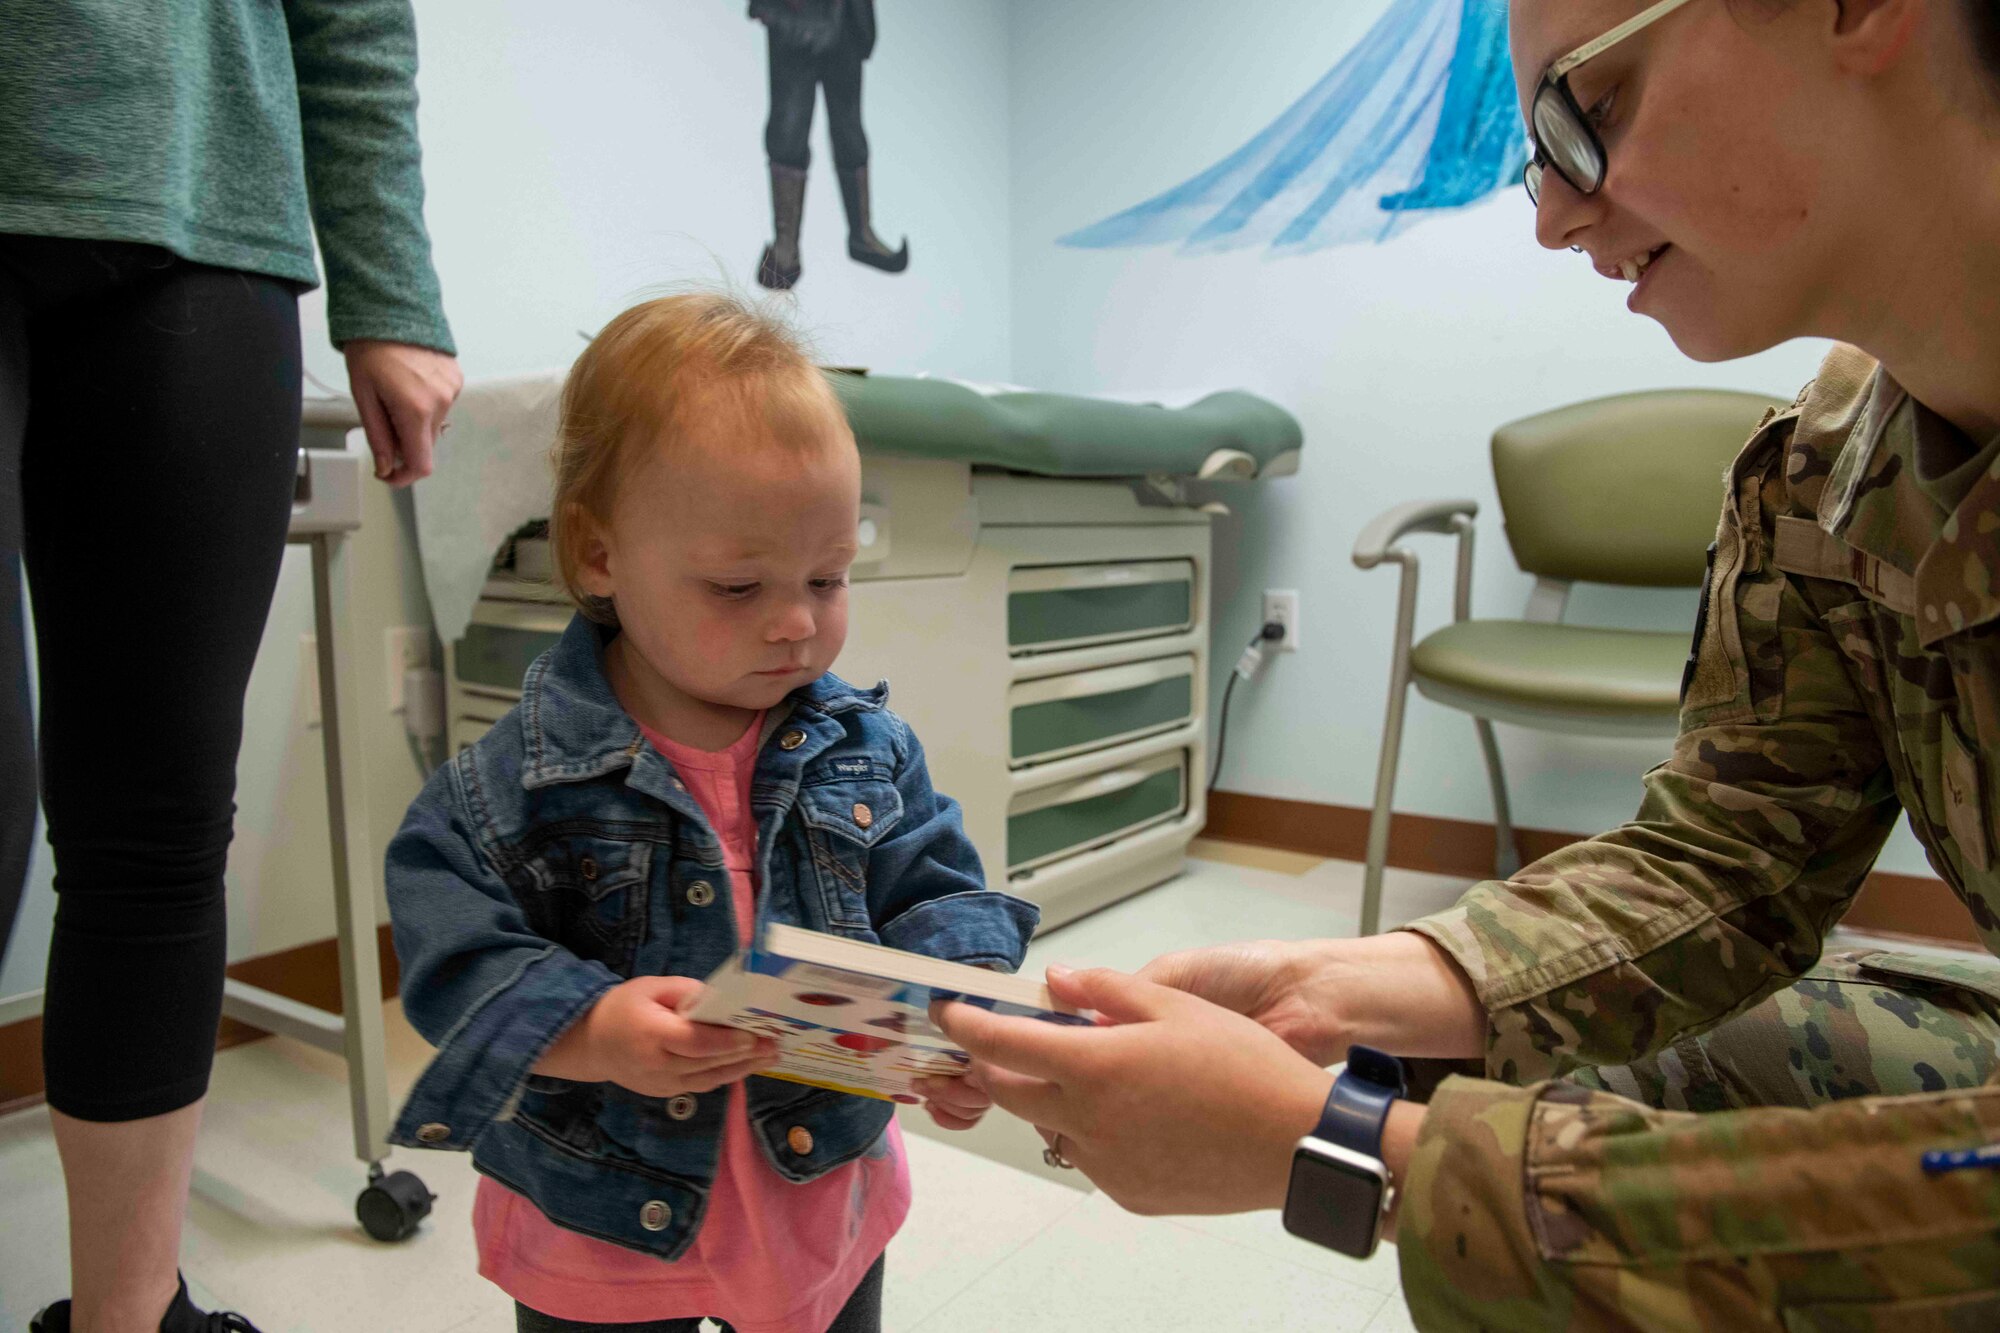 U.S. Air Force Airman 1st Class Madelyn Wall, 9th Healthcare Operations Squadron aerospace medical service technician, gives a book to Emerson Hales for the Reach Out and Read Initiative during a clinical visit at the pediatrics clinic June 19, 2023, at Beale Air Force Base, California.